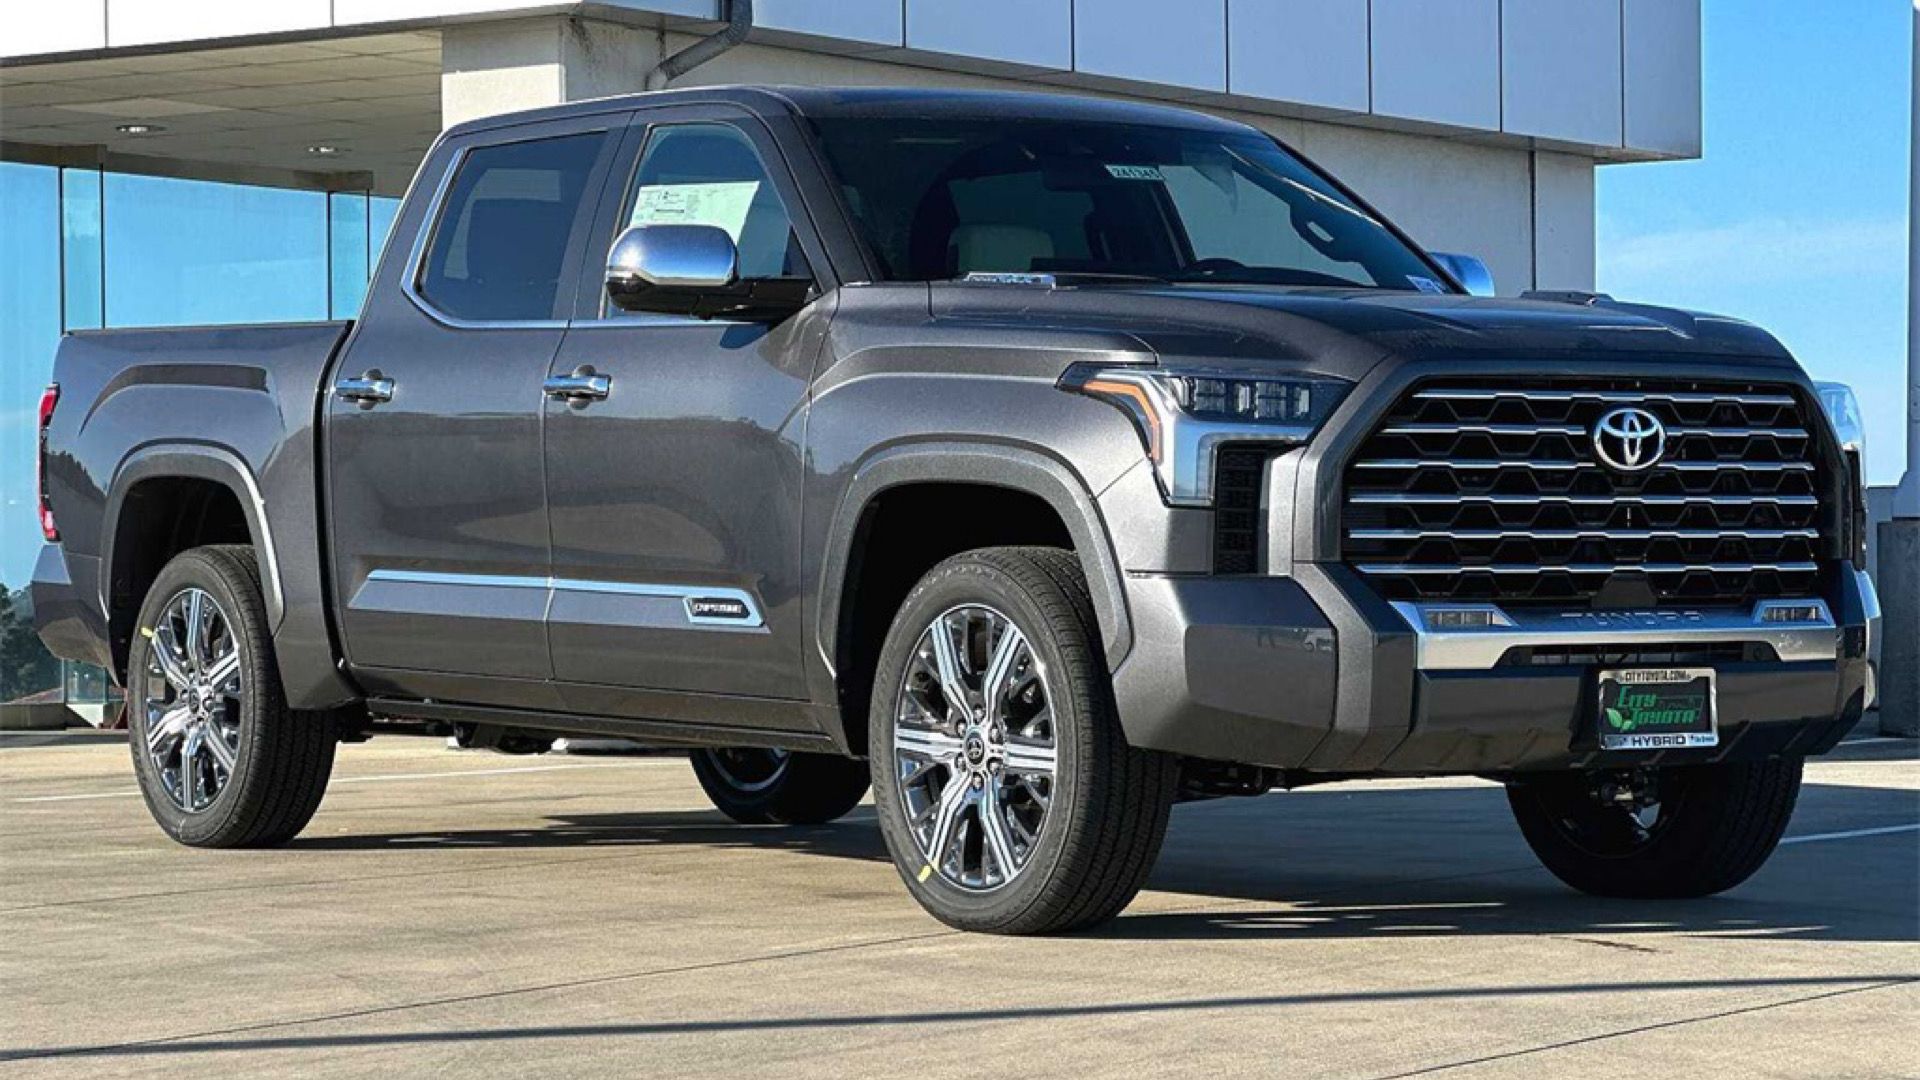 2024 Toyota Tundra Capstone in gray Posing in front of showroom 